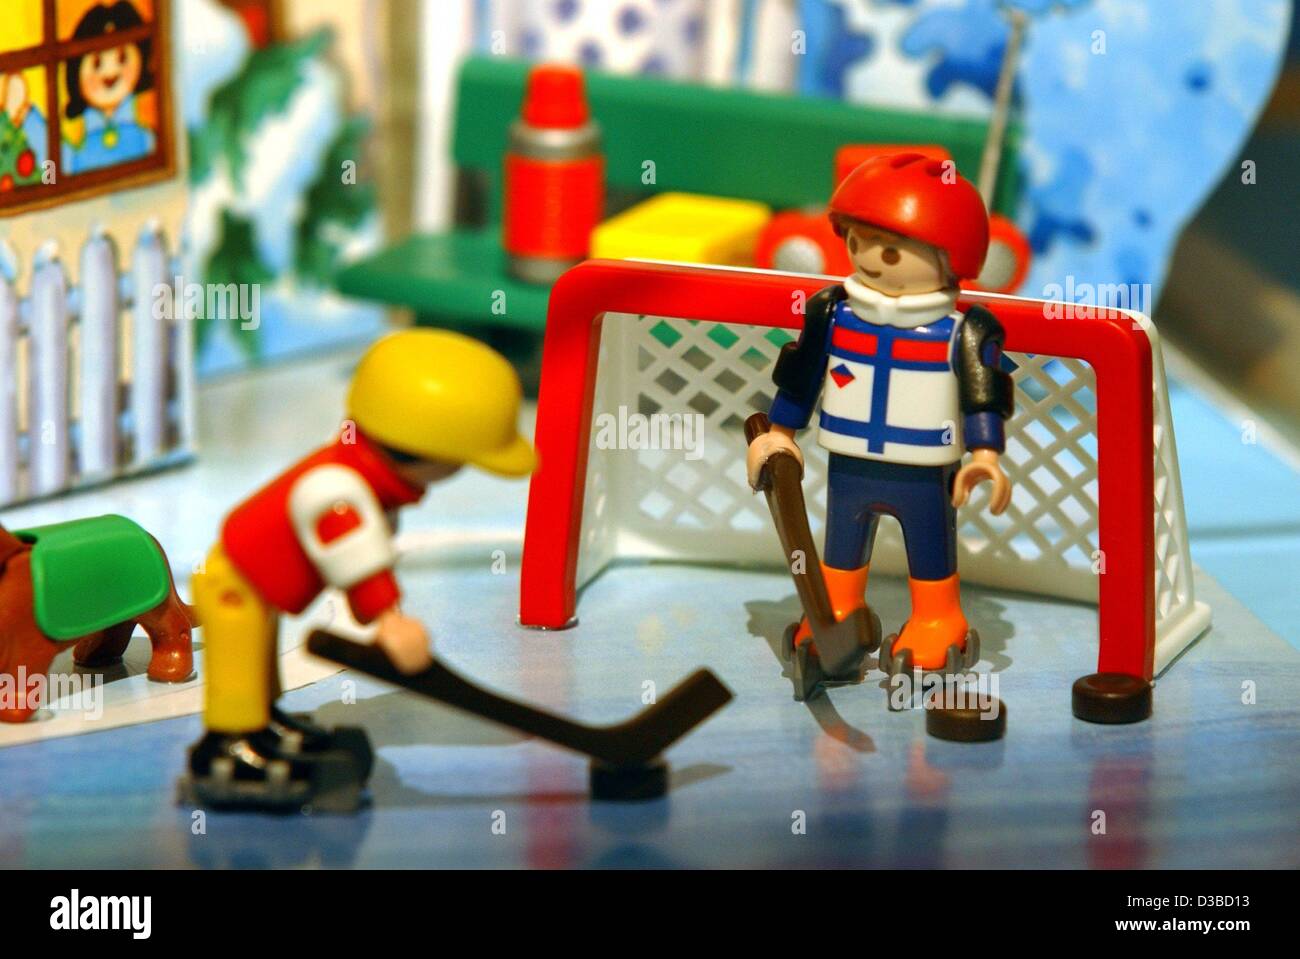 dpa) - Playmobil presented ice hockey players as its newest figures at the  54th Nuremberg toy trade fair in Nuremberg, Germany, 30 January 2003.  Playmobil manufacturer 'geobra Brandstaetter' announced that the turnover